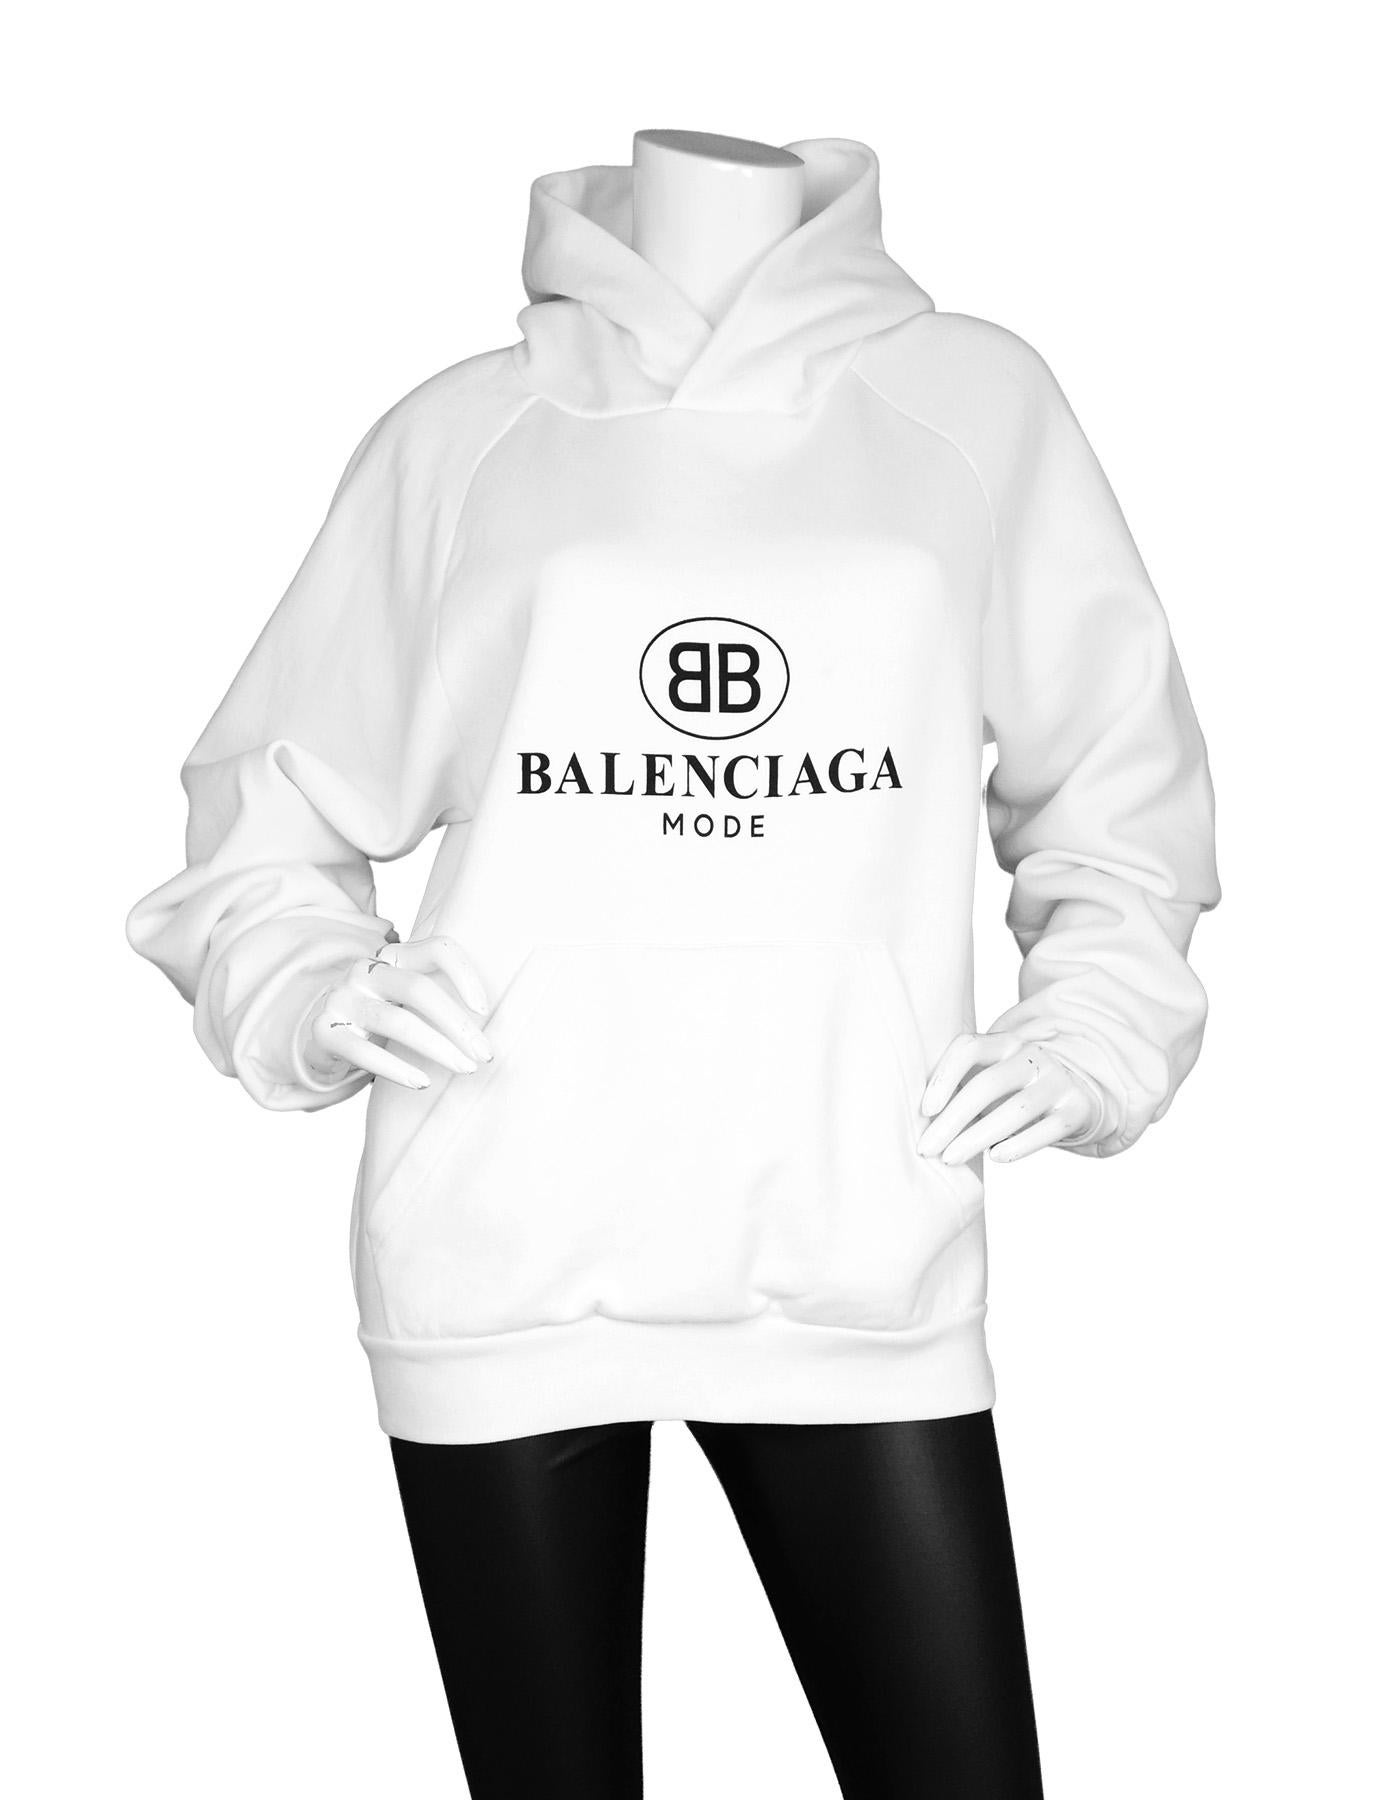 Balenciaga Unisex White BB Mode Hoodie

Made in: Portugal
Color: White with black lettering
Composition: 80% cotton, 20% polyester
Closure/Opening: Pull over
Exterior Pockets: One sweatshirt patch
Overall Condition: Excellent pre-owned condition